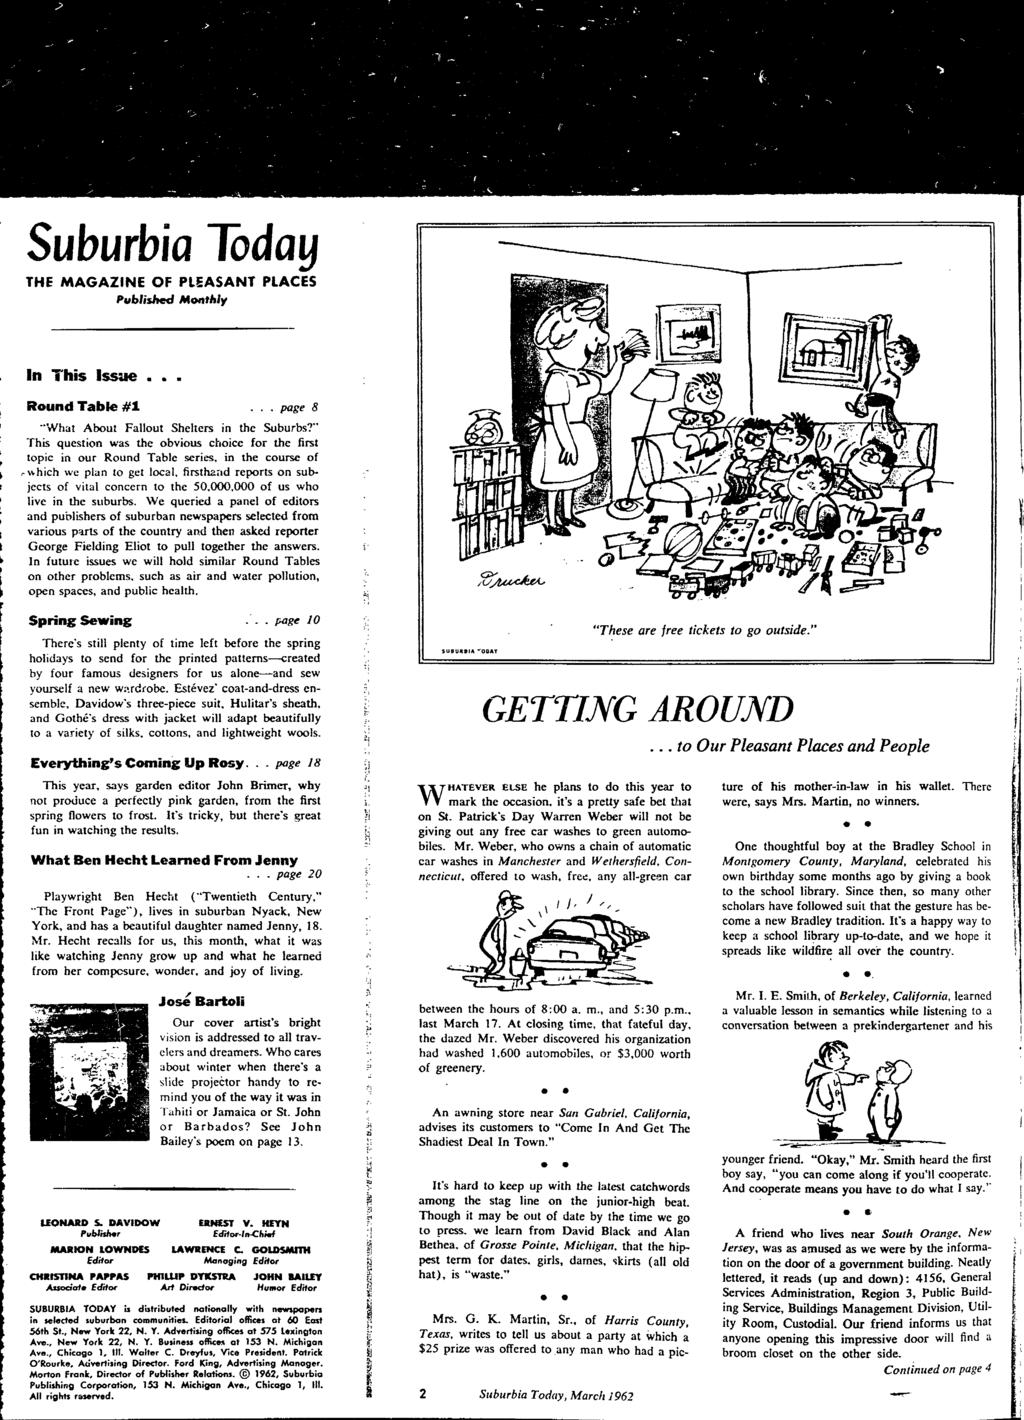 Suburbia Toda!l THE MAGAZNE Publisltecl OF PLEASANT PLACES Mon''''y n This ssue Round Table #1, page 8 "What About Fallout Sheltcrs in the Suburbs?